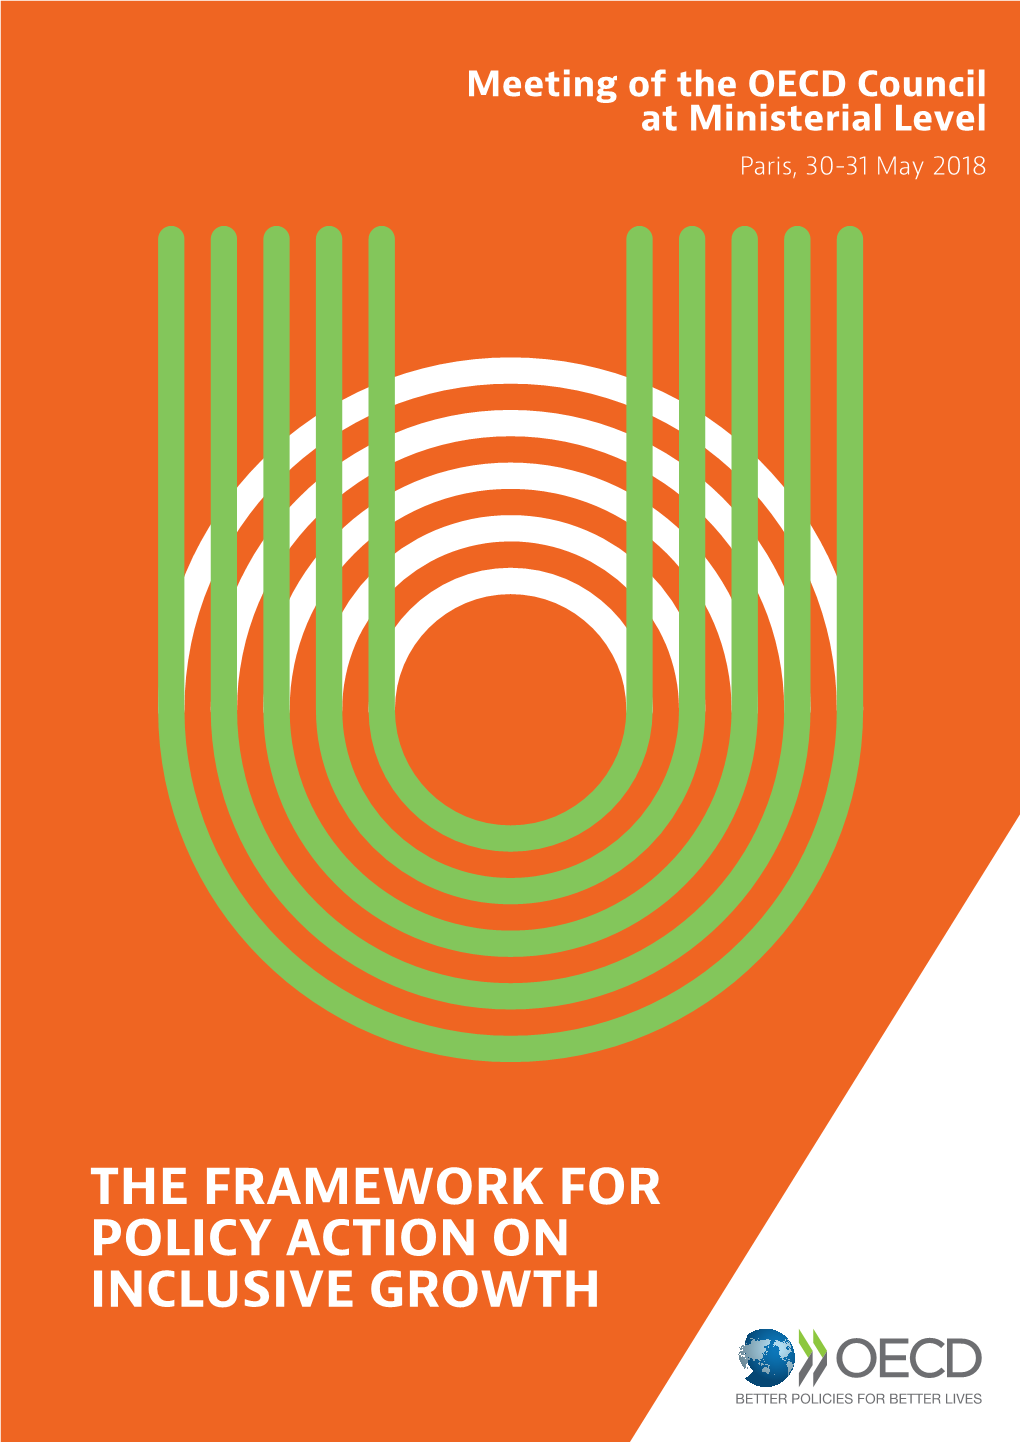 The Framework for Policy Action on Inclusive Growth